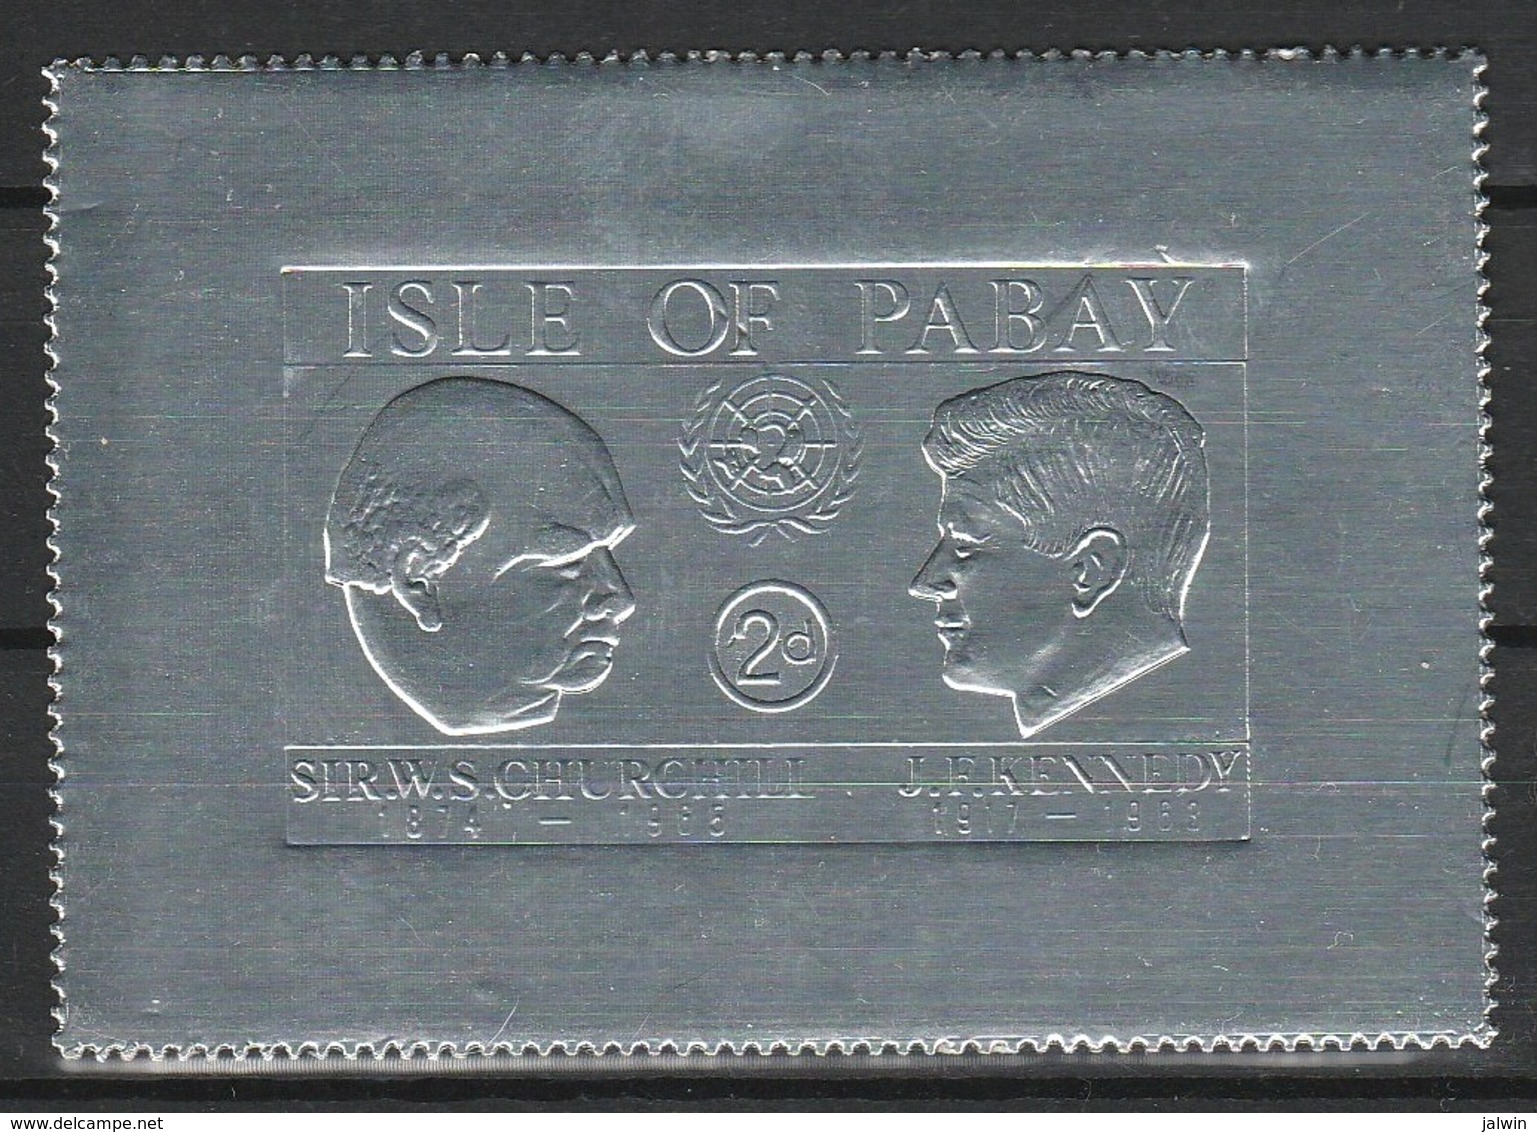 ISLE OF PABAY (Emission Locale) 1967 - SERIE KENNEDY AND CHURCHILL SILVER LARGER 2d ** - Local Issues